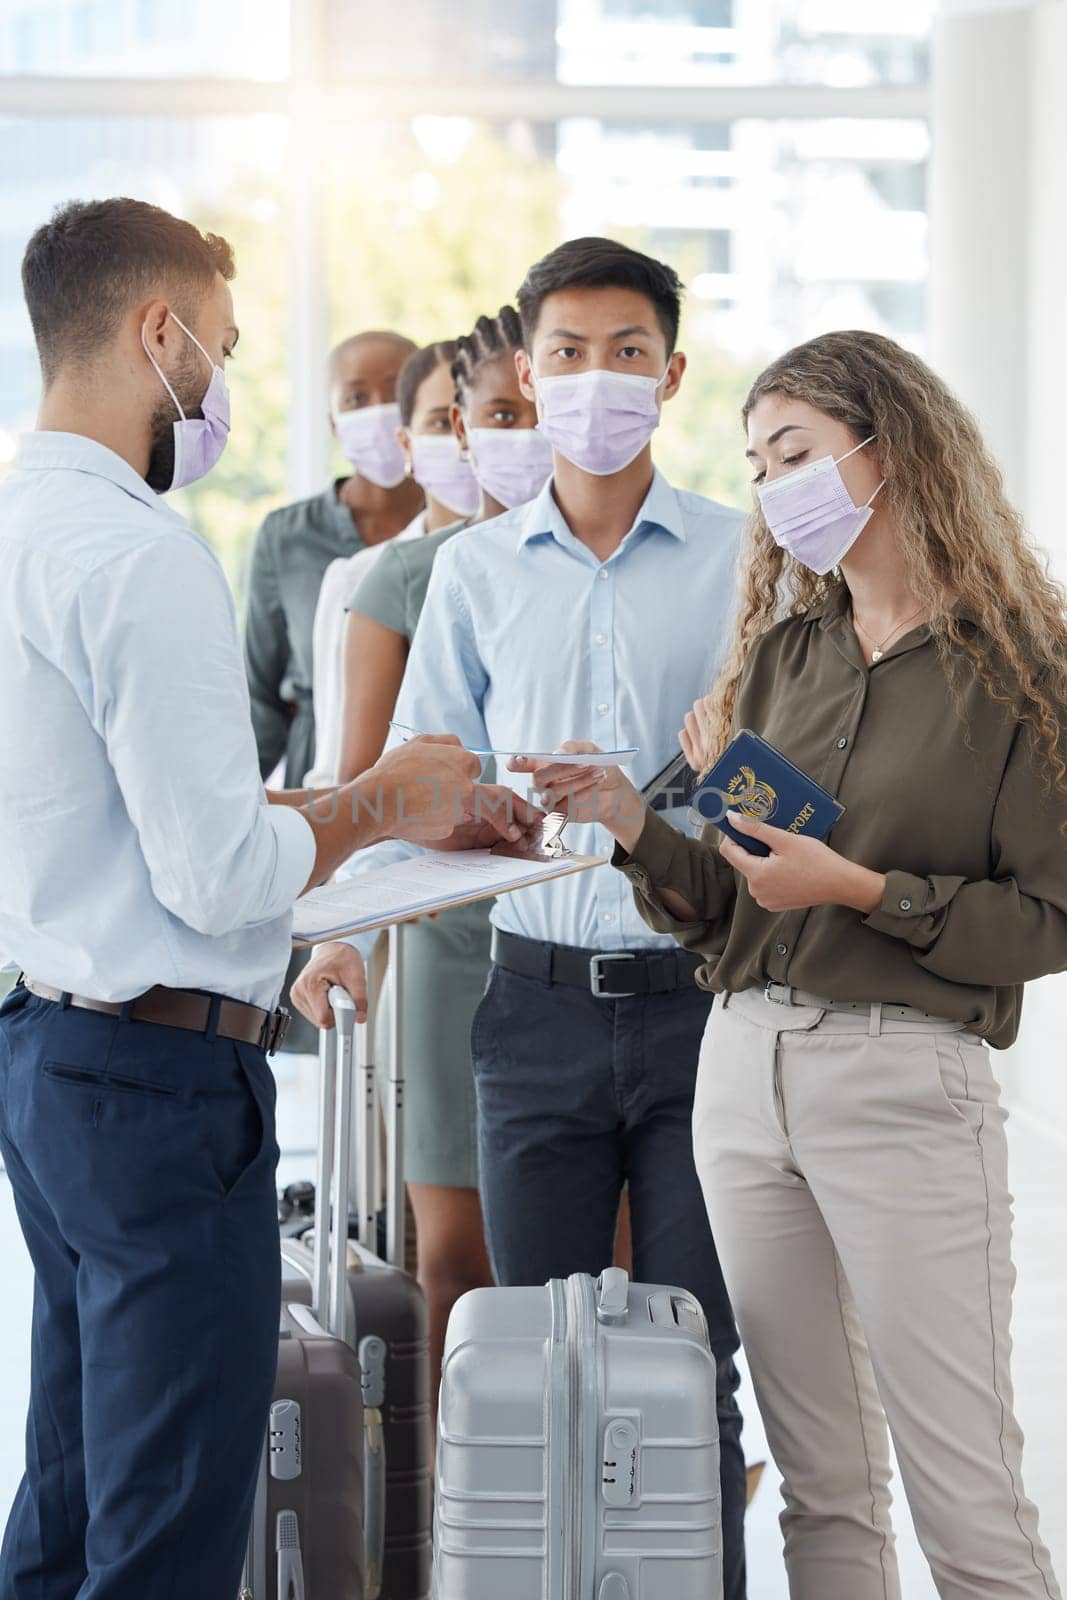 Covid, travel and passport with people at airport security for document check, immigration law and corona virus policy. Compliance worker with immigration checklist or safety paperwork for insurance.